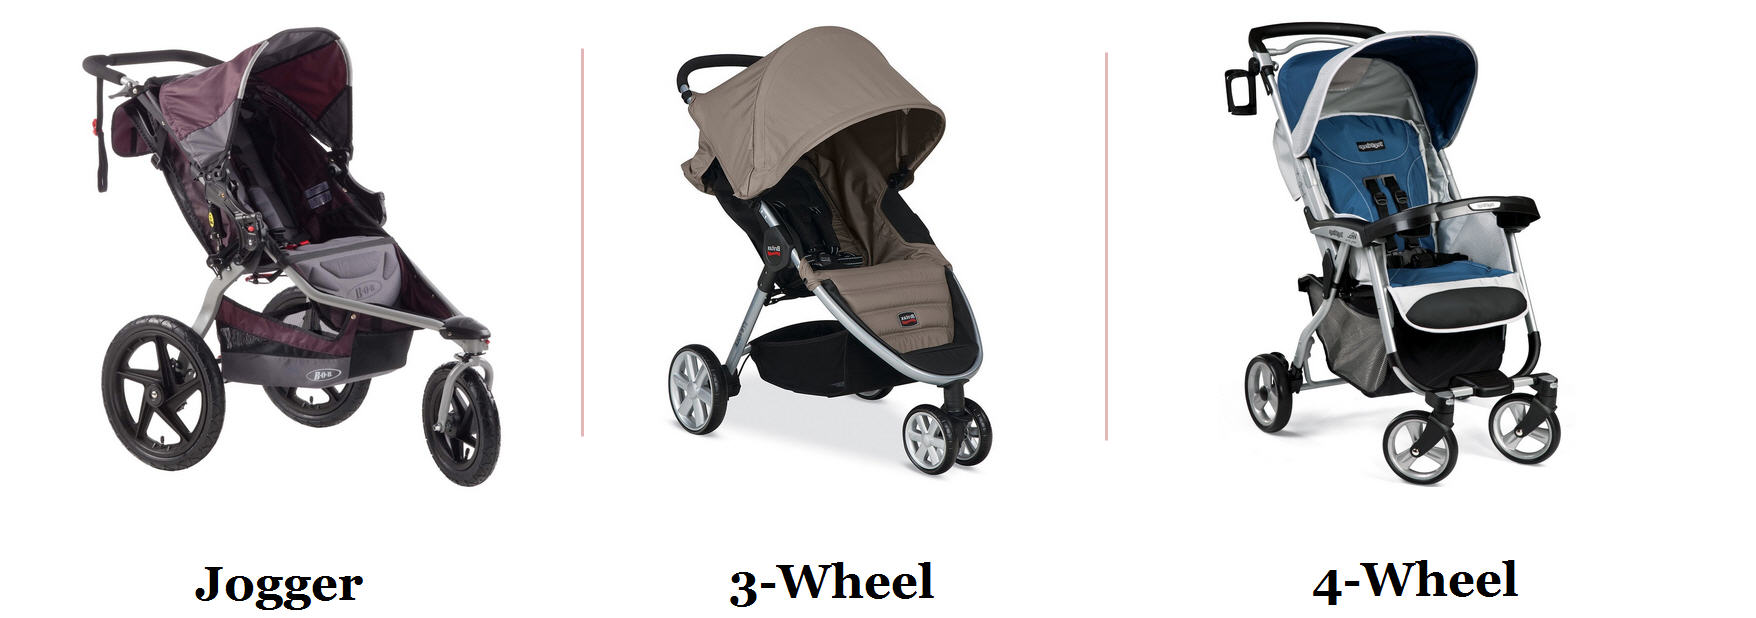 3 wheel stroller and carseat combo